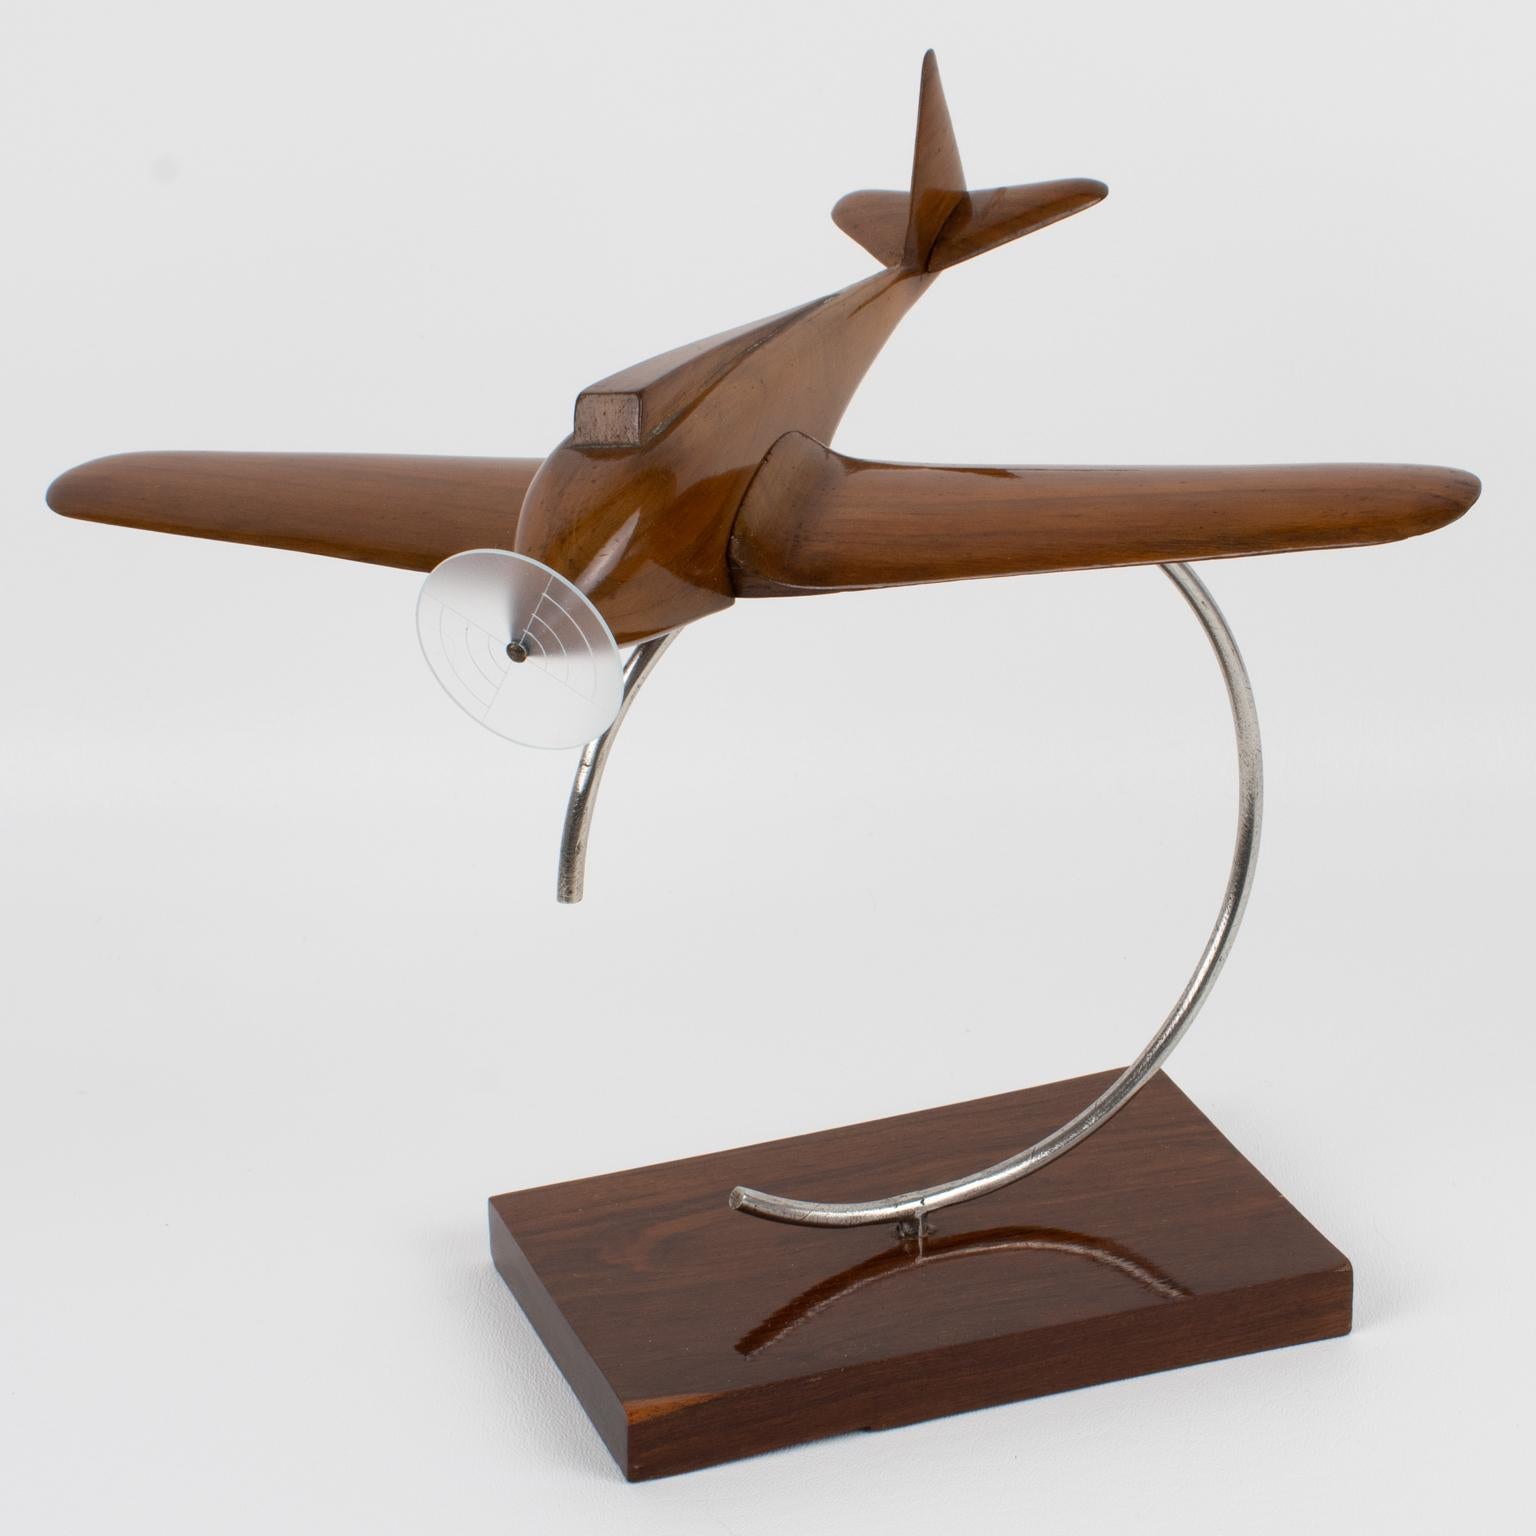 Stylish Art Deco wood airplane propeller model mounted on a geometric wood and metal display. This Art Deco model airplane is in solid wood with a lovely warm patina. It has one large Lucite propeller (note the original propeller was probably from a